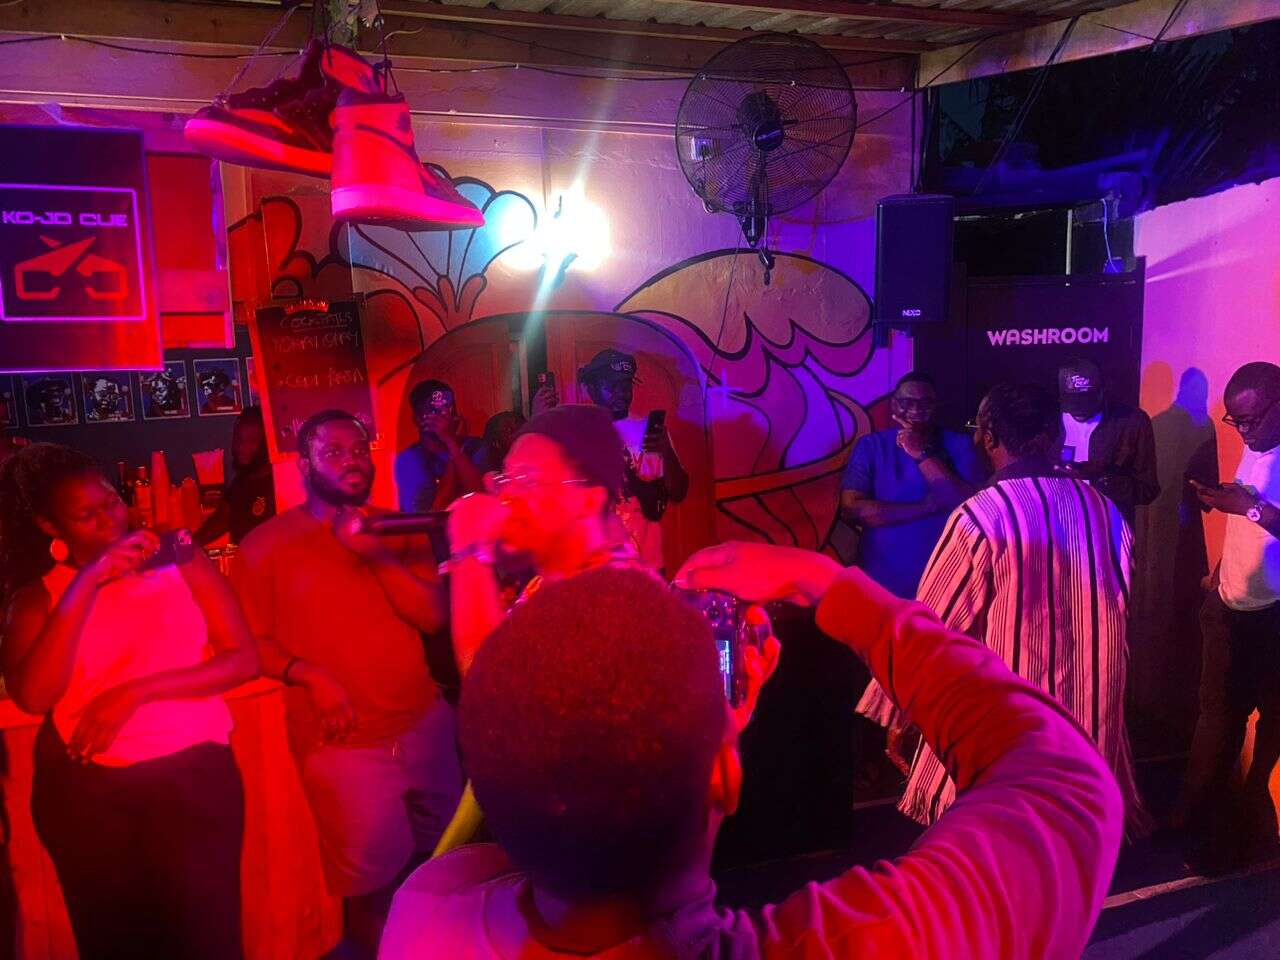 Ko-Jo Cue lights up Beehive with electric listening party for "I'm Back" EP release